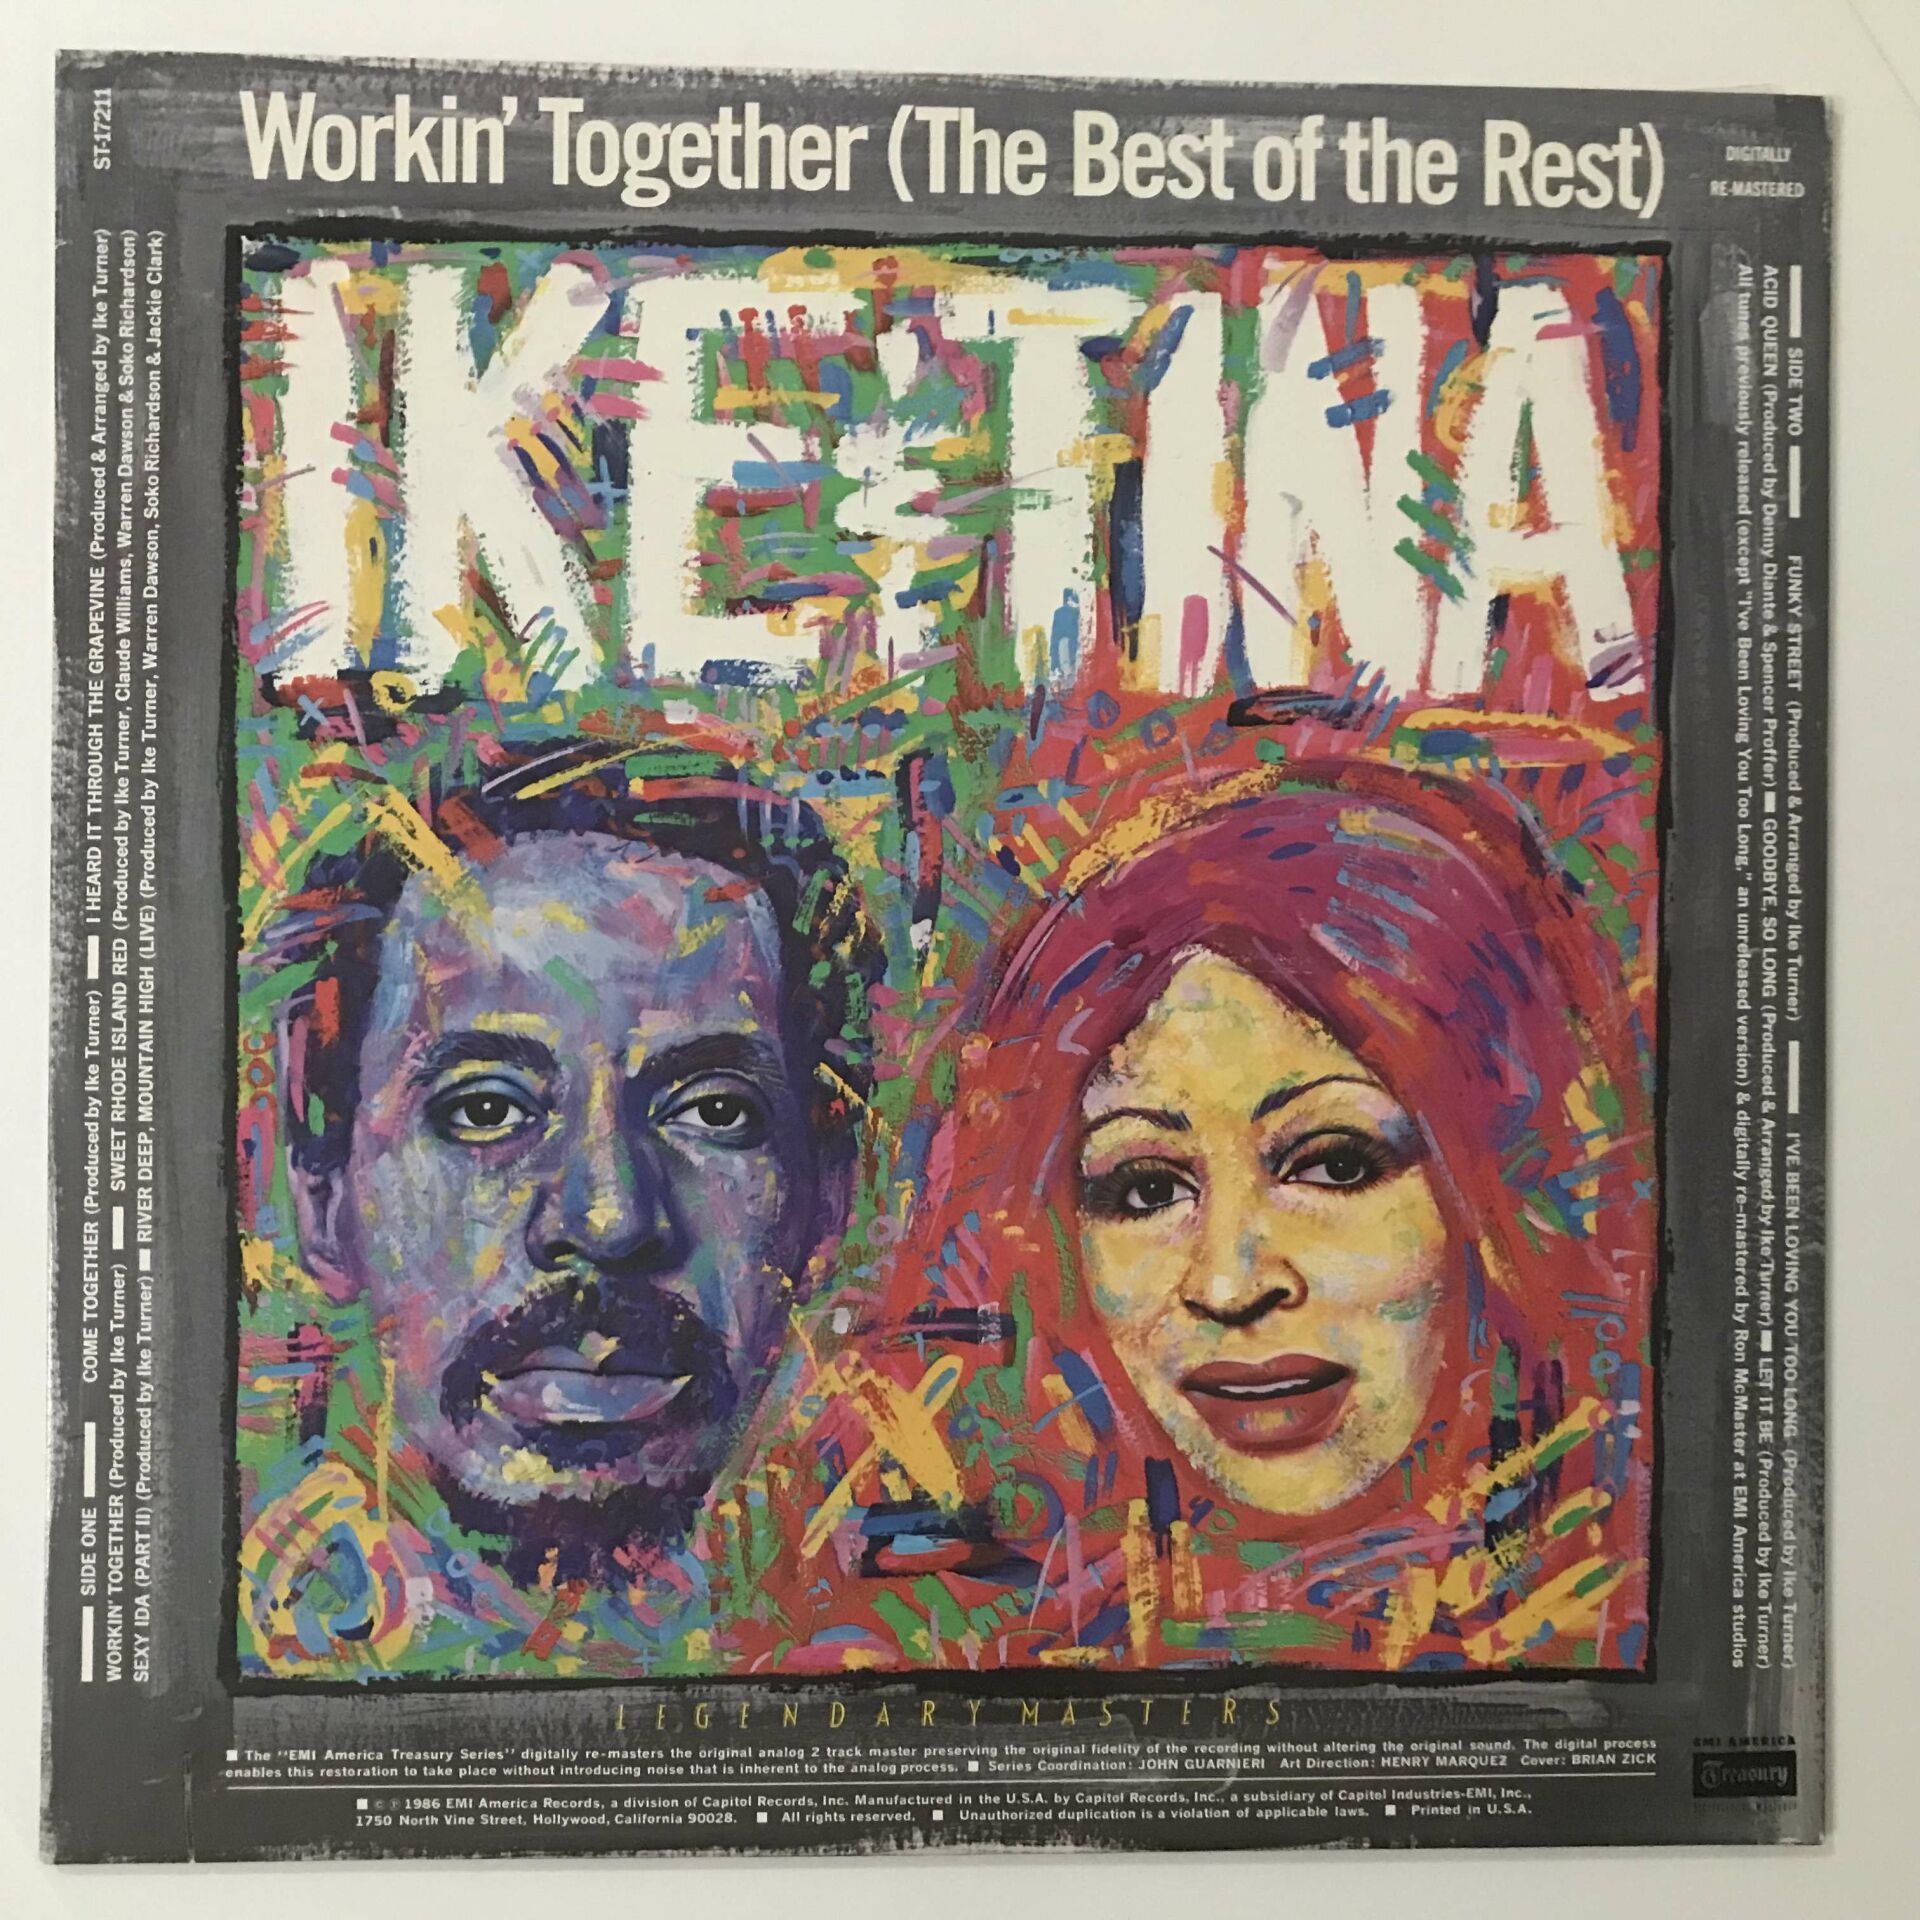 Ike & Tina Turner – Workin' Together (The Best Of The Rest)